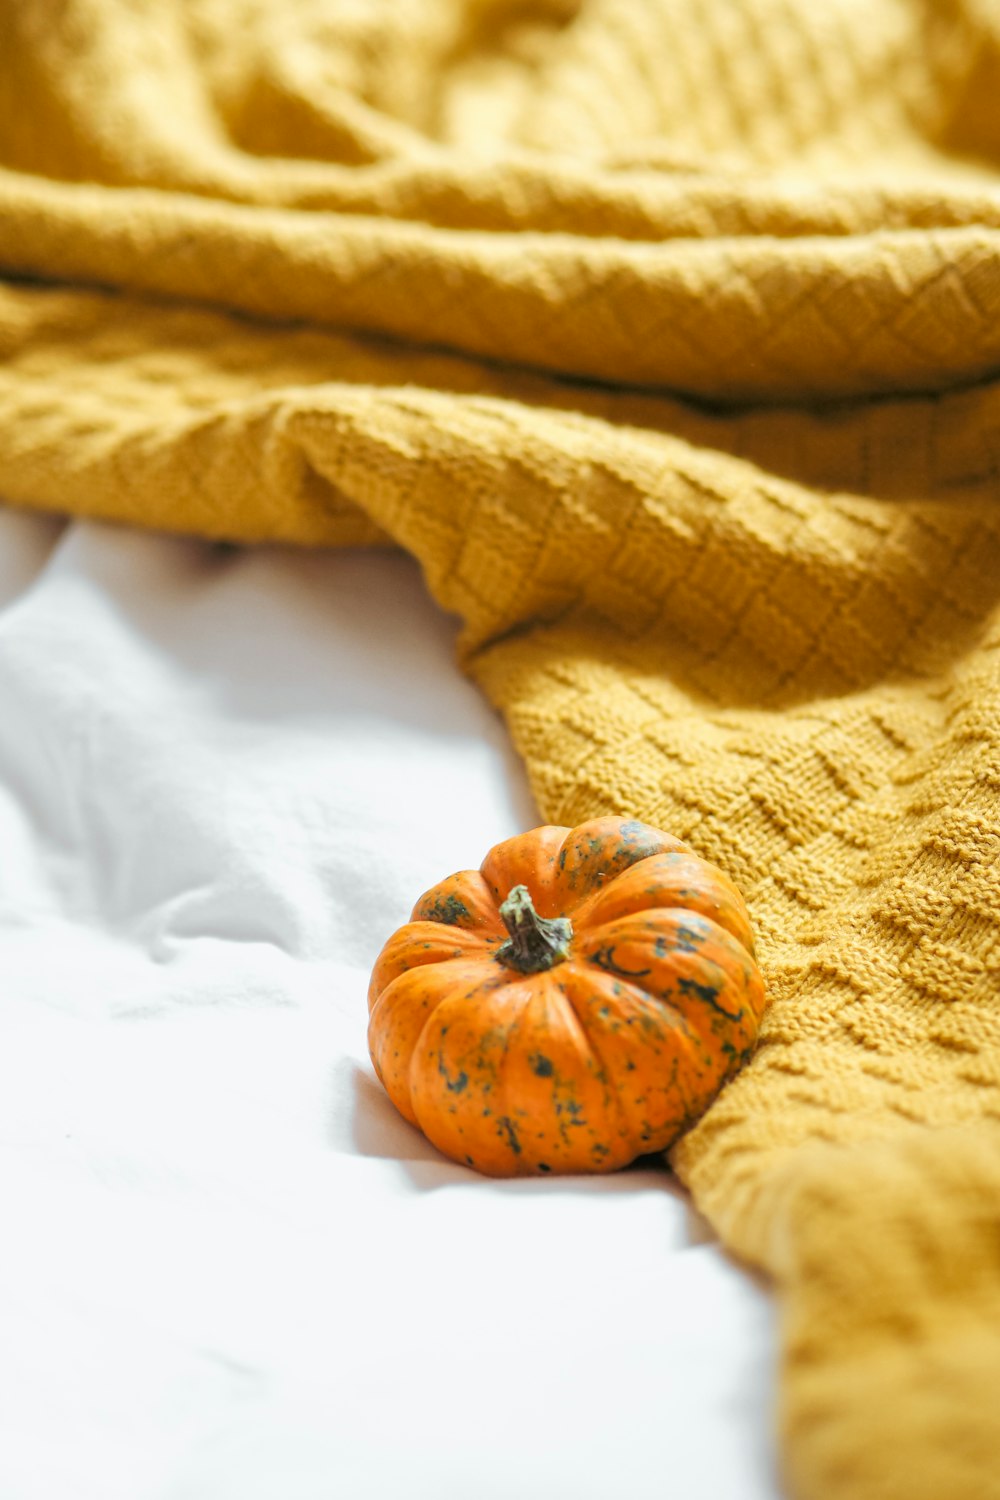 a small orange pumpkin laying on a bed